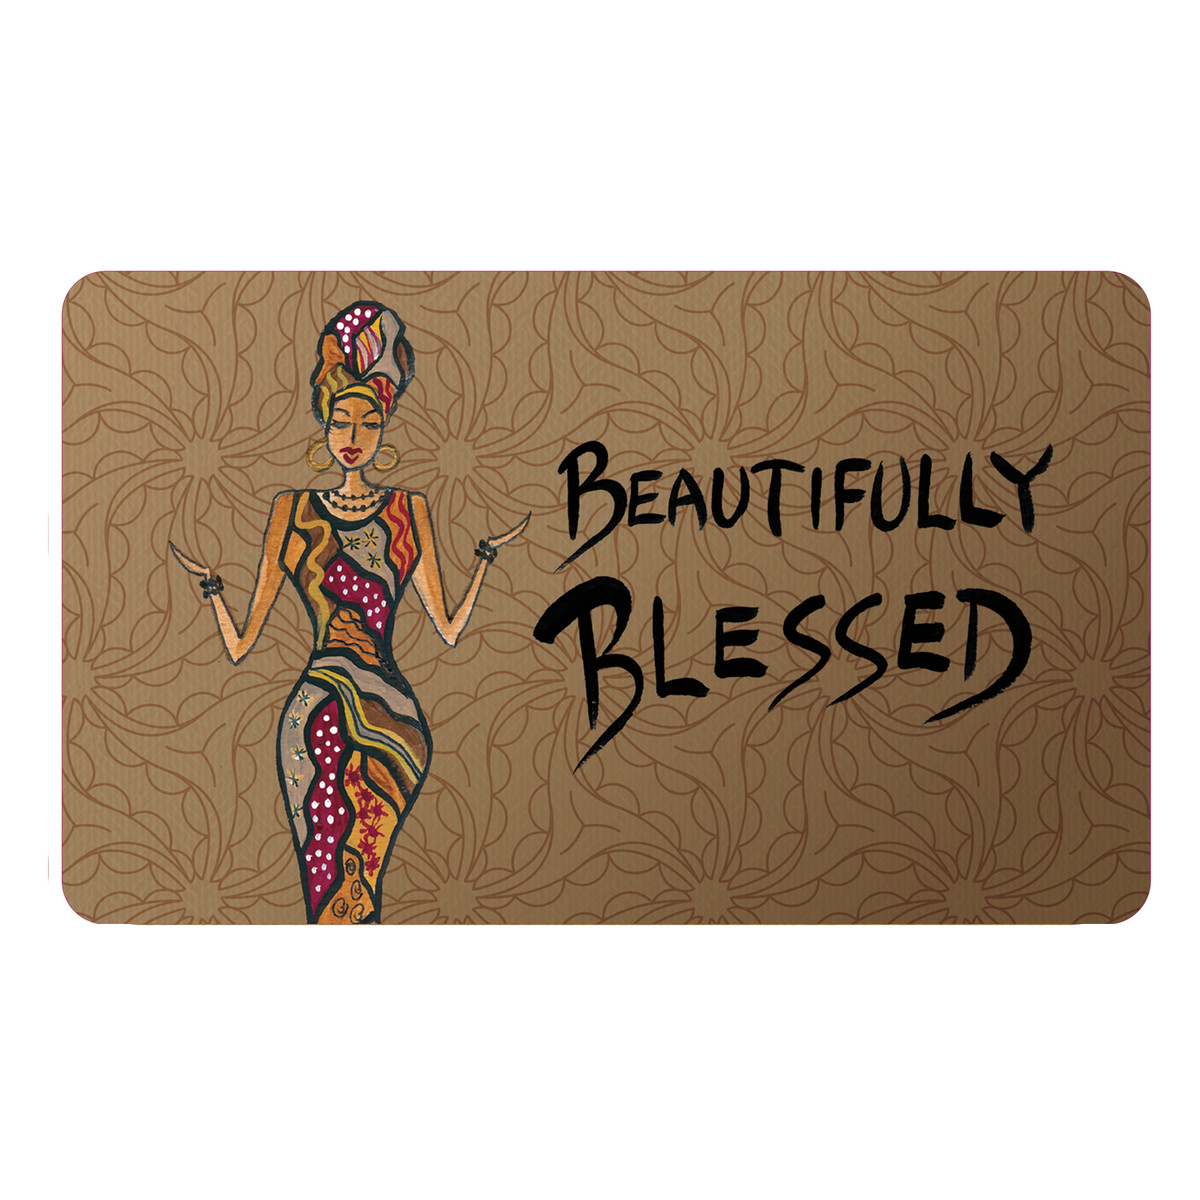 Interior Floor Mats- "Beautifully Blessed" By Cidne Wallace